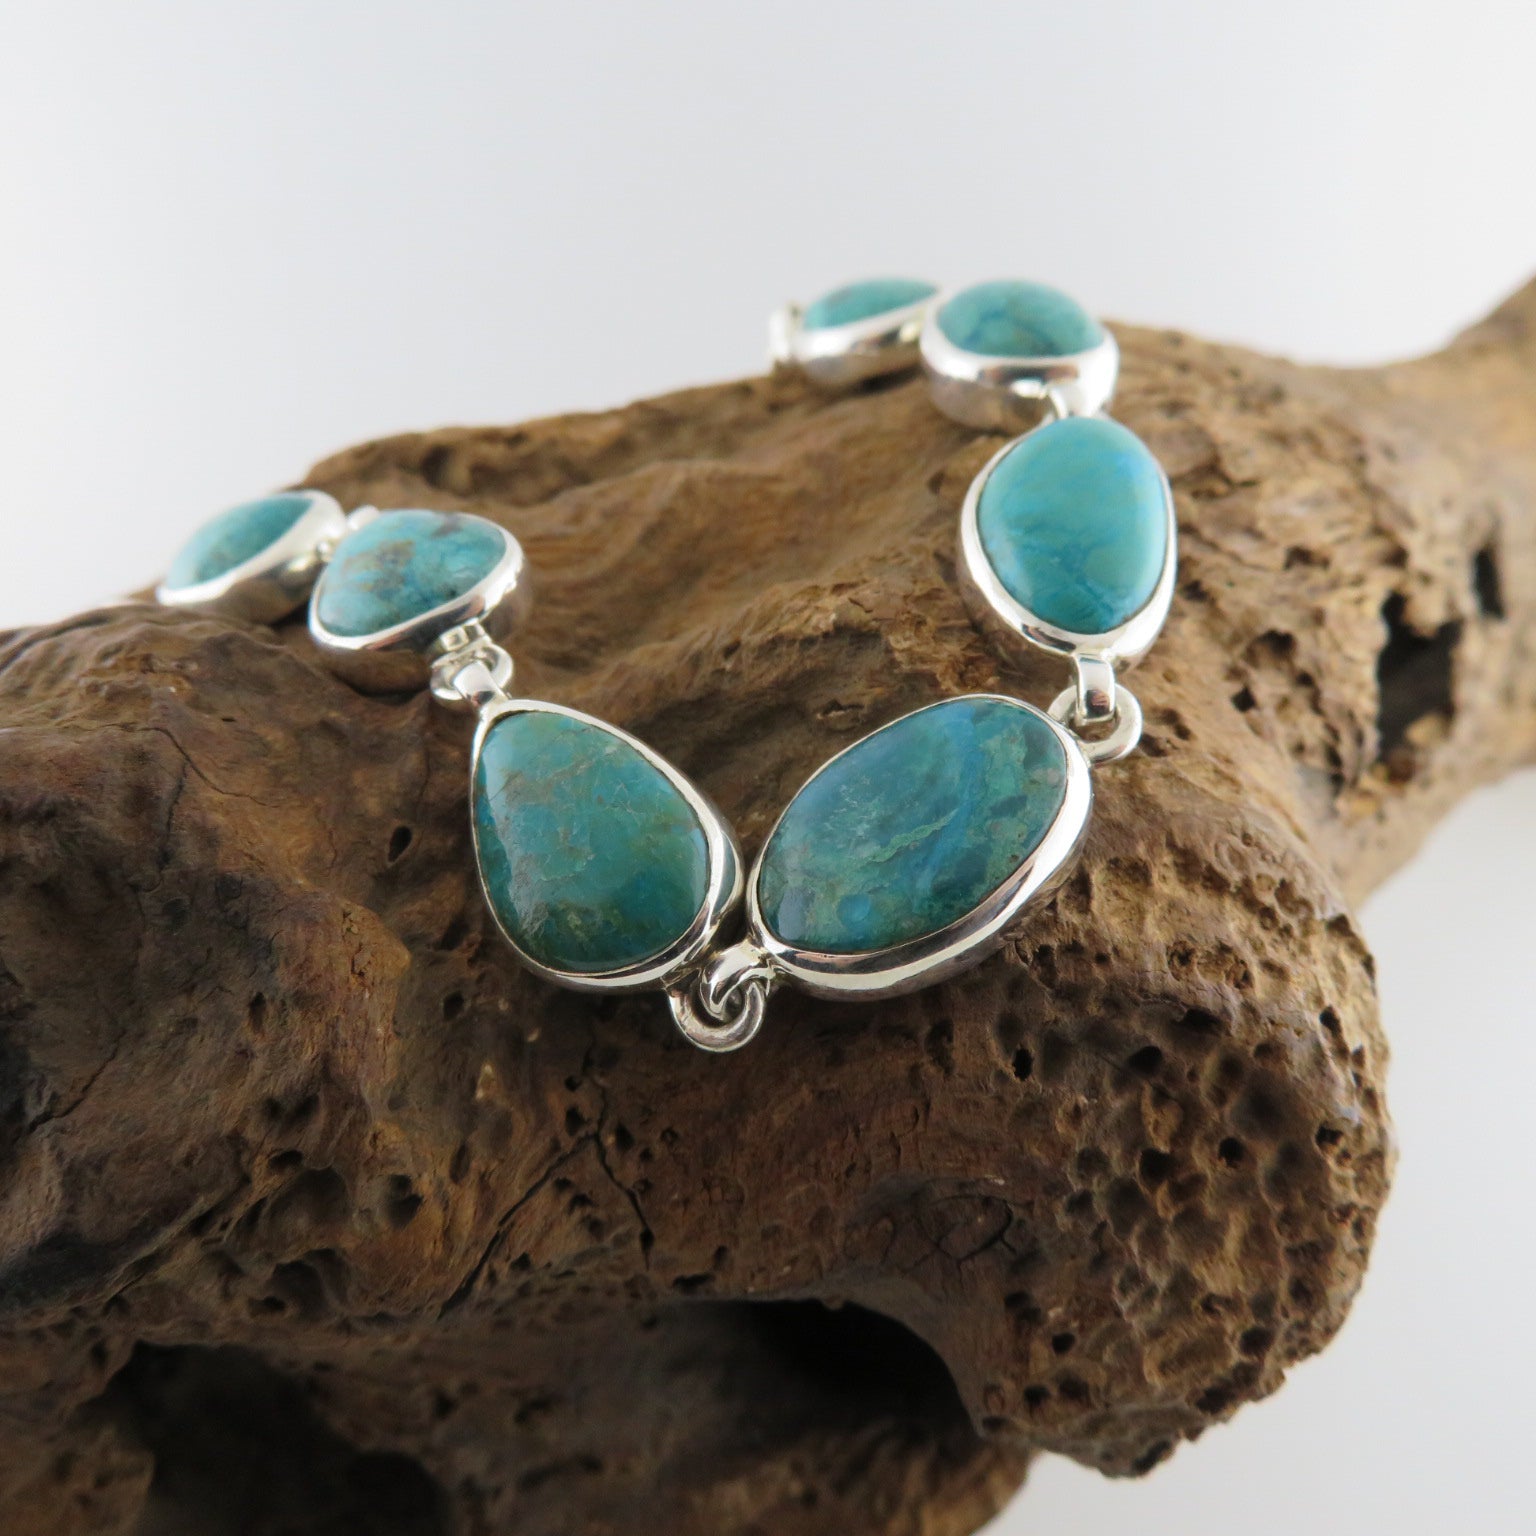 Chrysocolla Bracelet with Sterling Silver